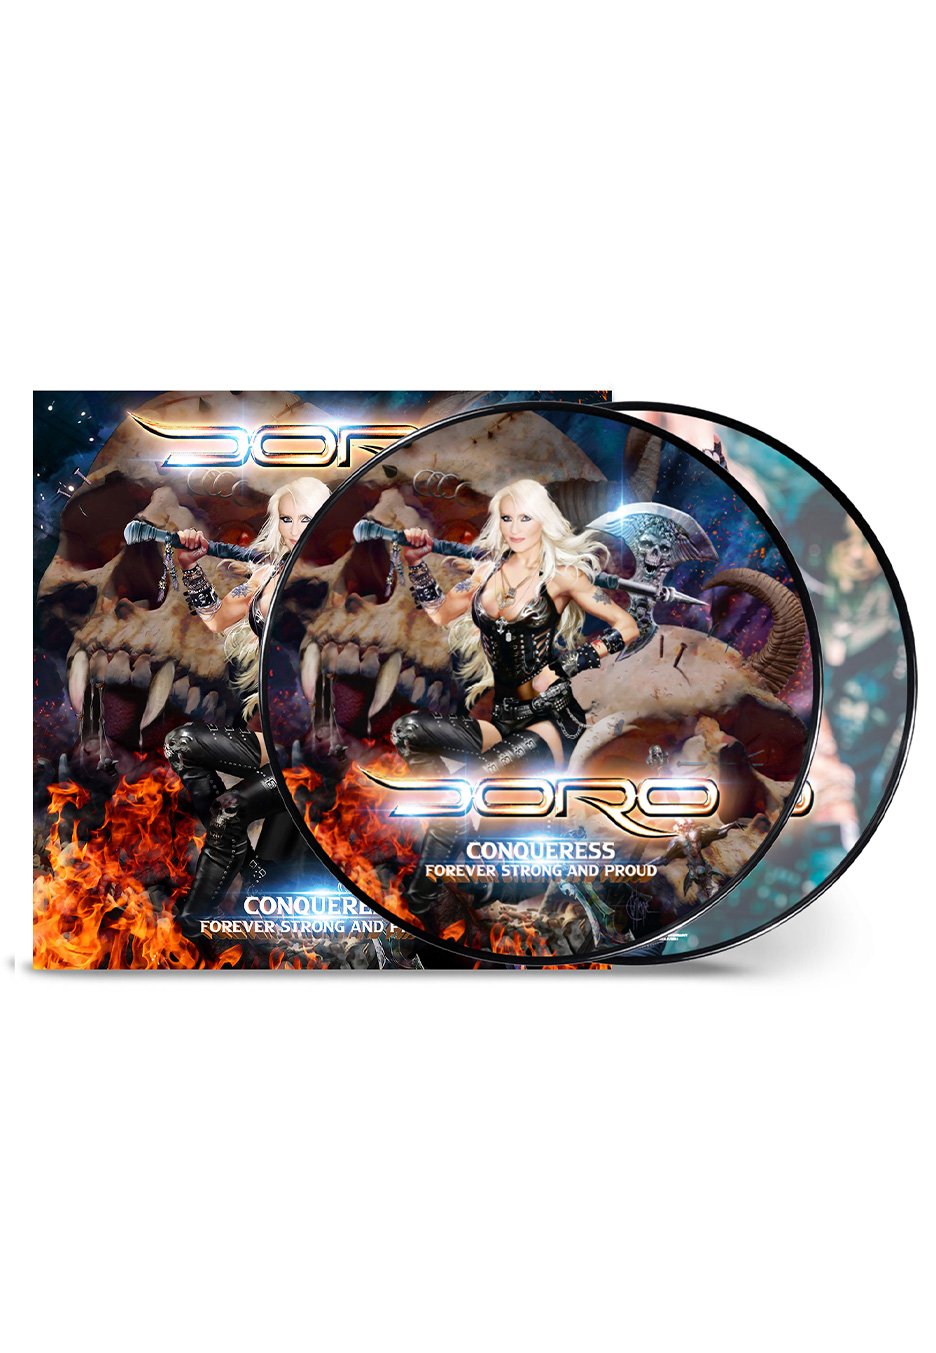 Doro - Conqueress - Forever Strong And Proud Ltd. - Picture 2 Vinyl